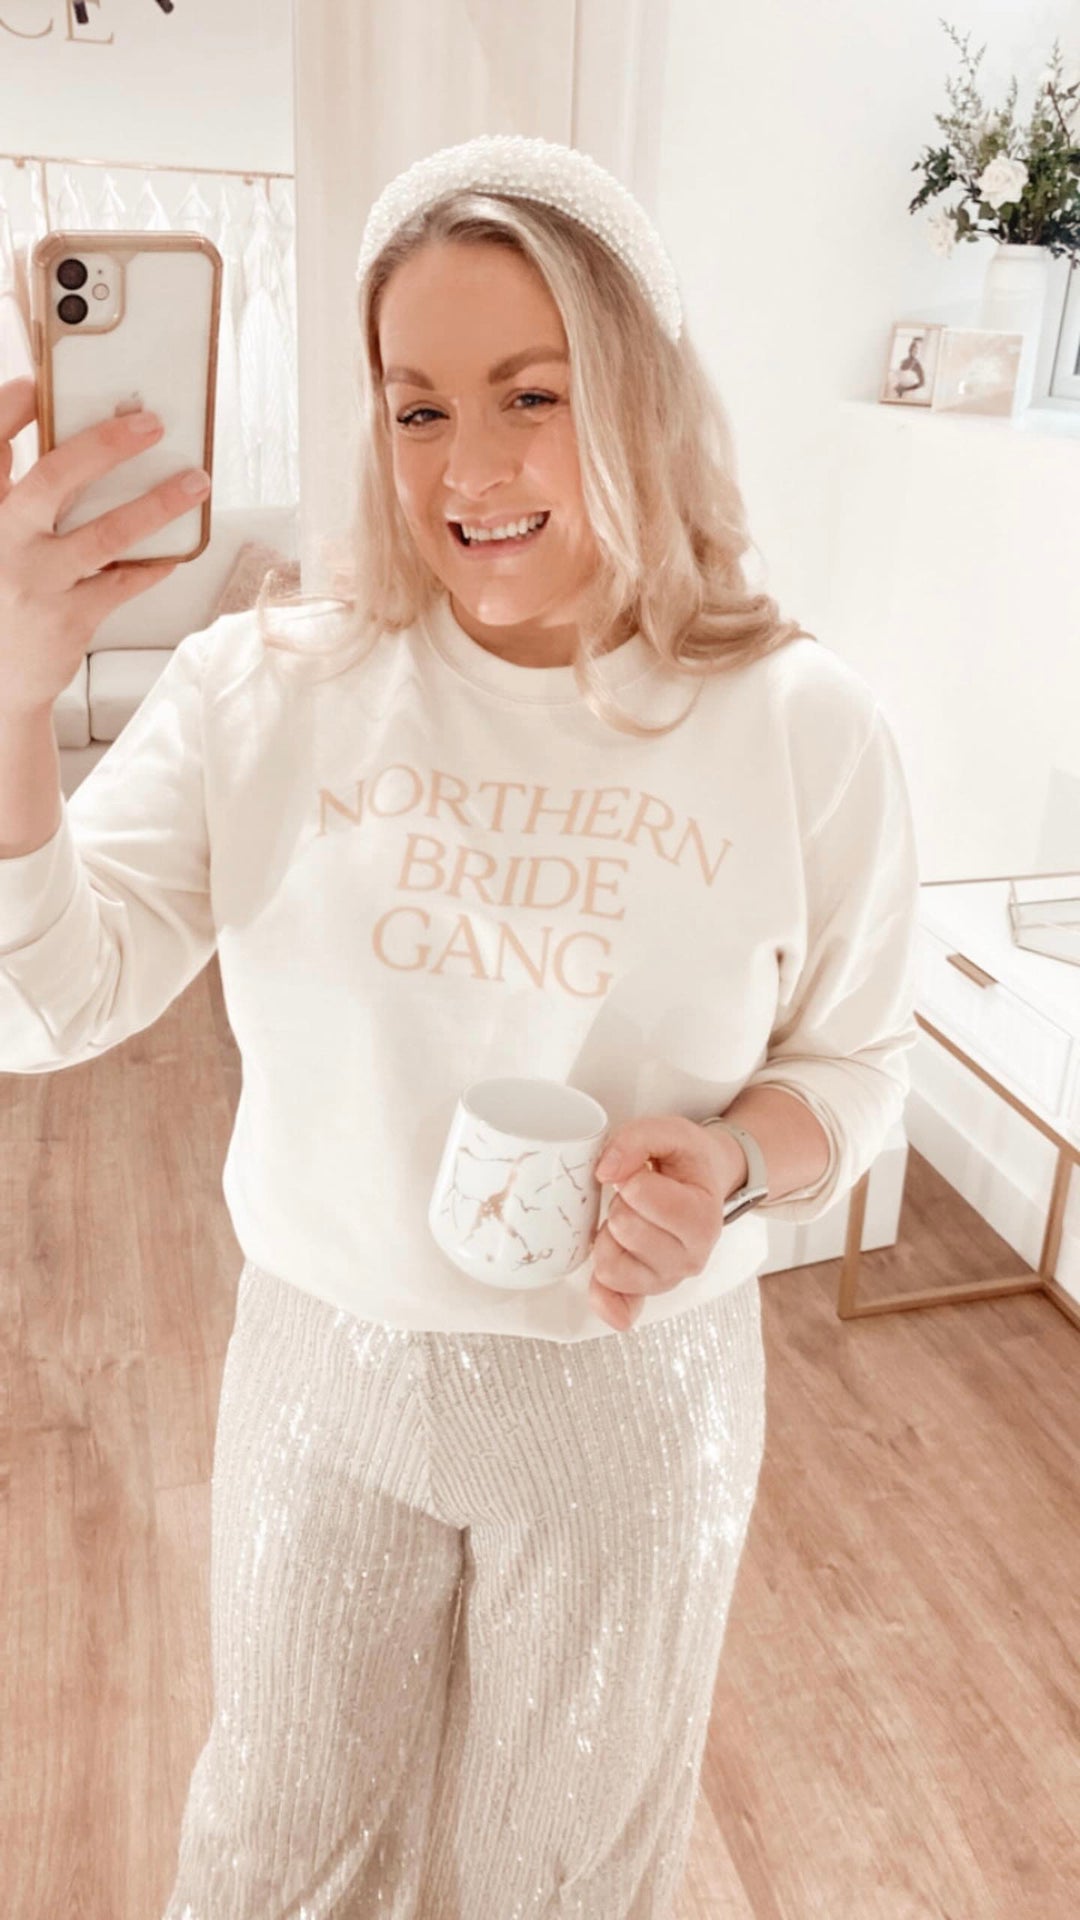 Northern Bride Gang Sweater